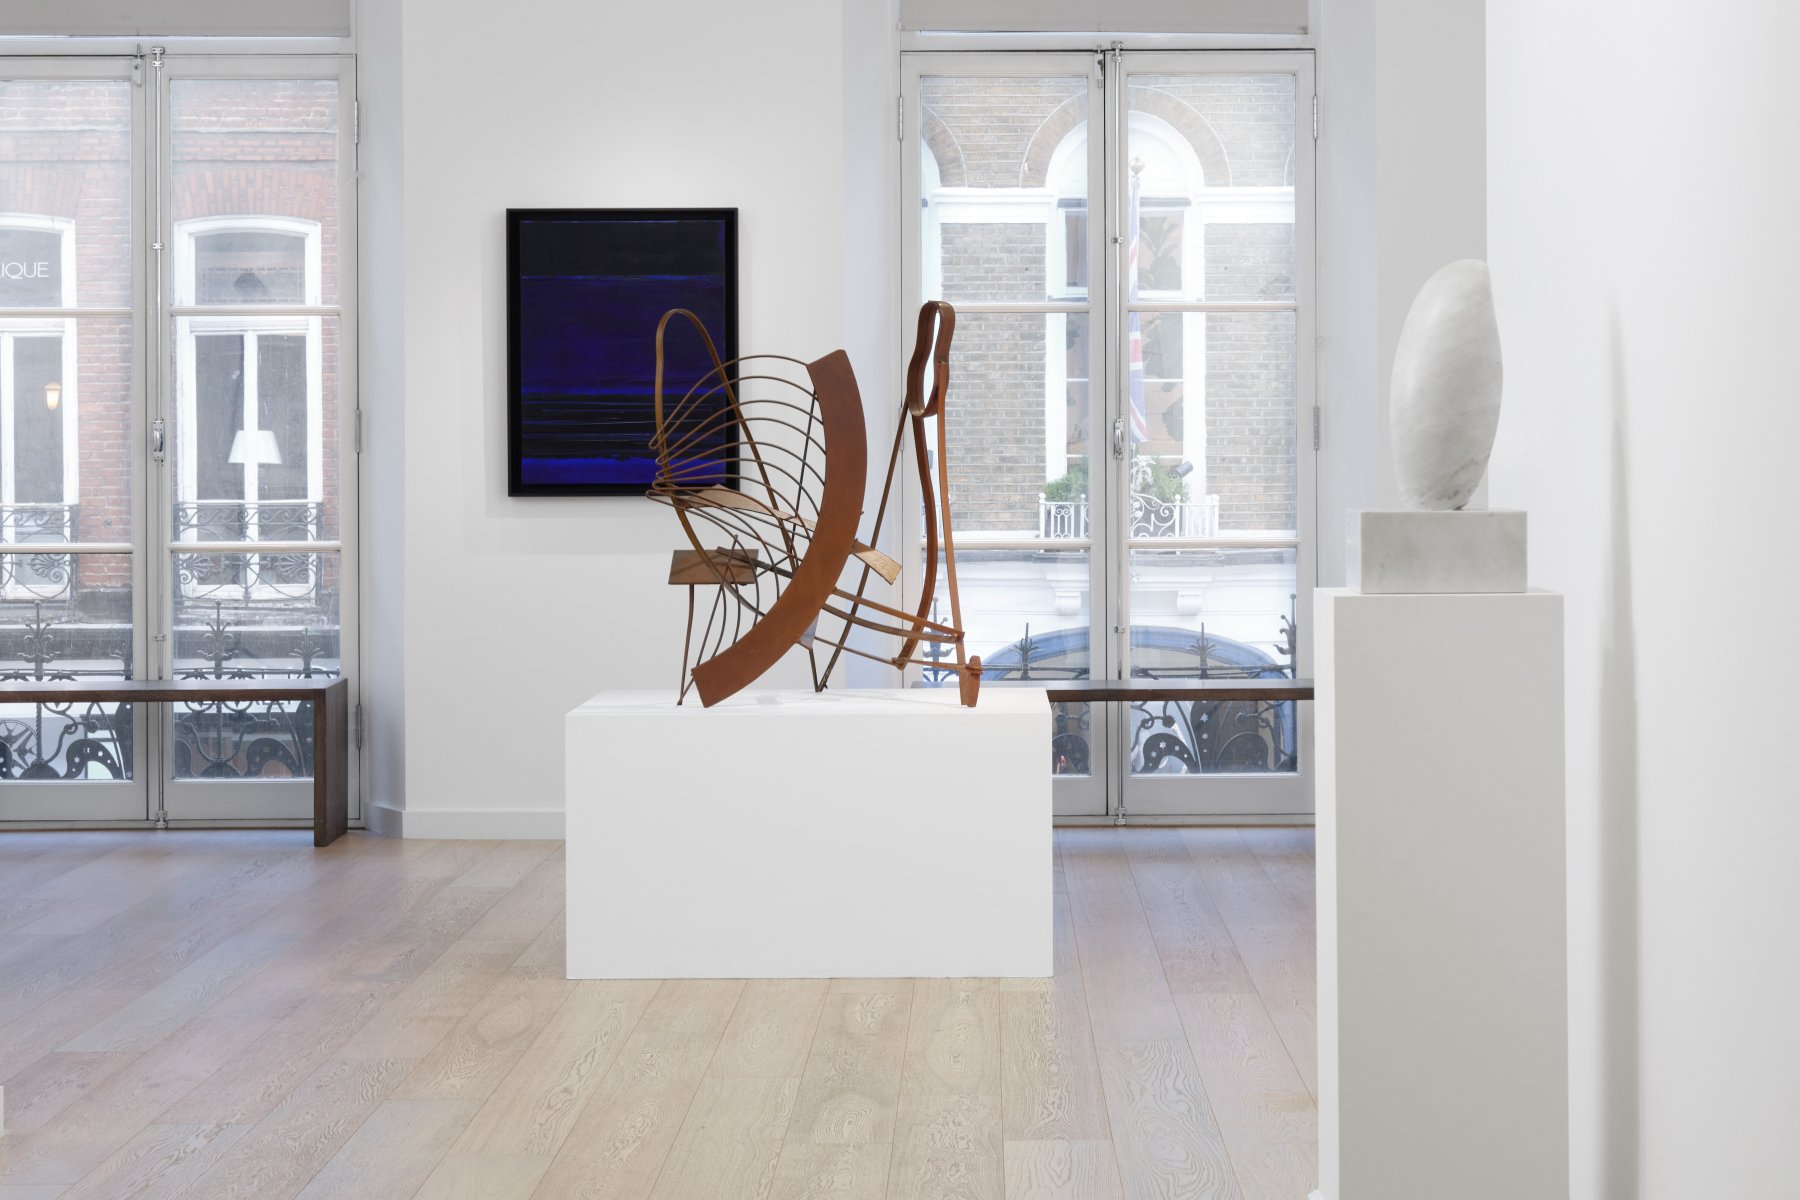 Installation image for Intercontinental Abstraction: Part 1, at Omer Tiroche Gallery